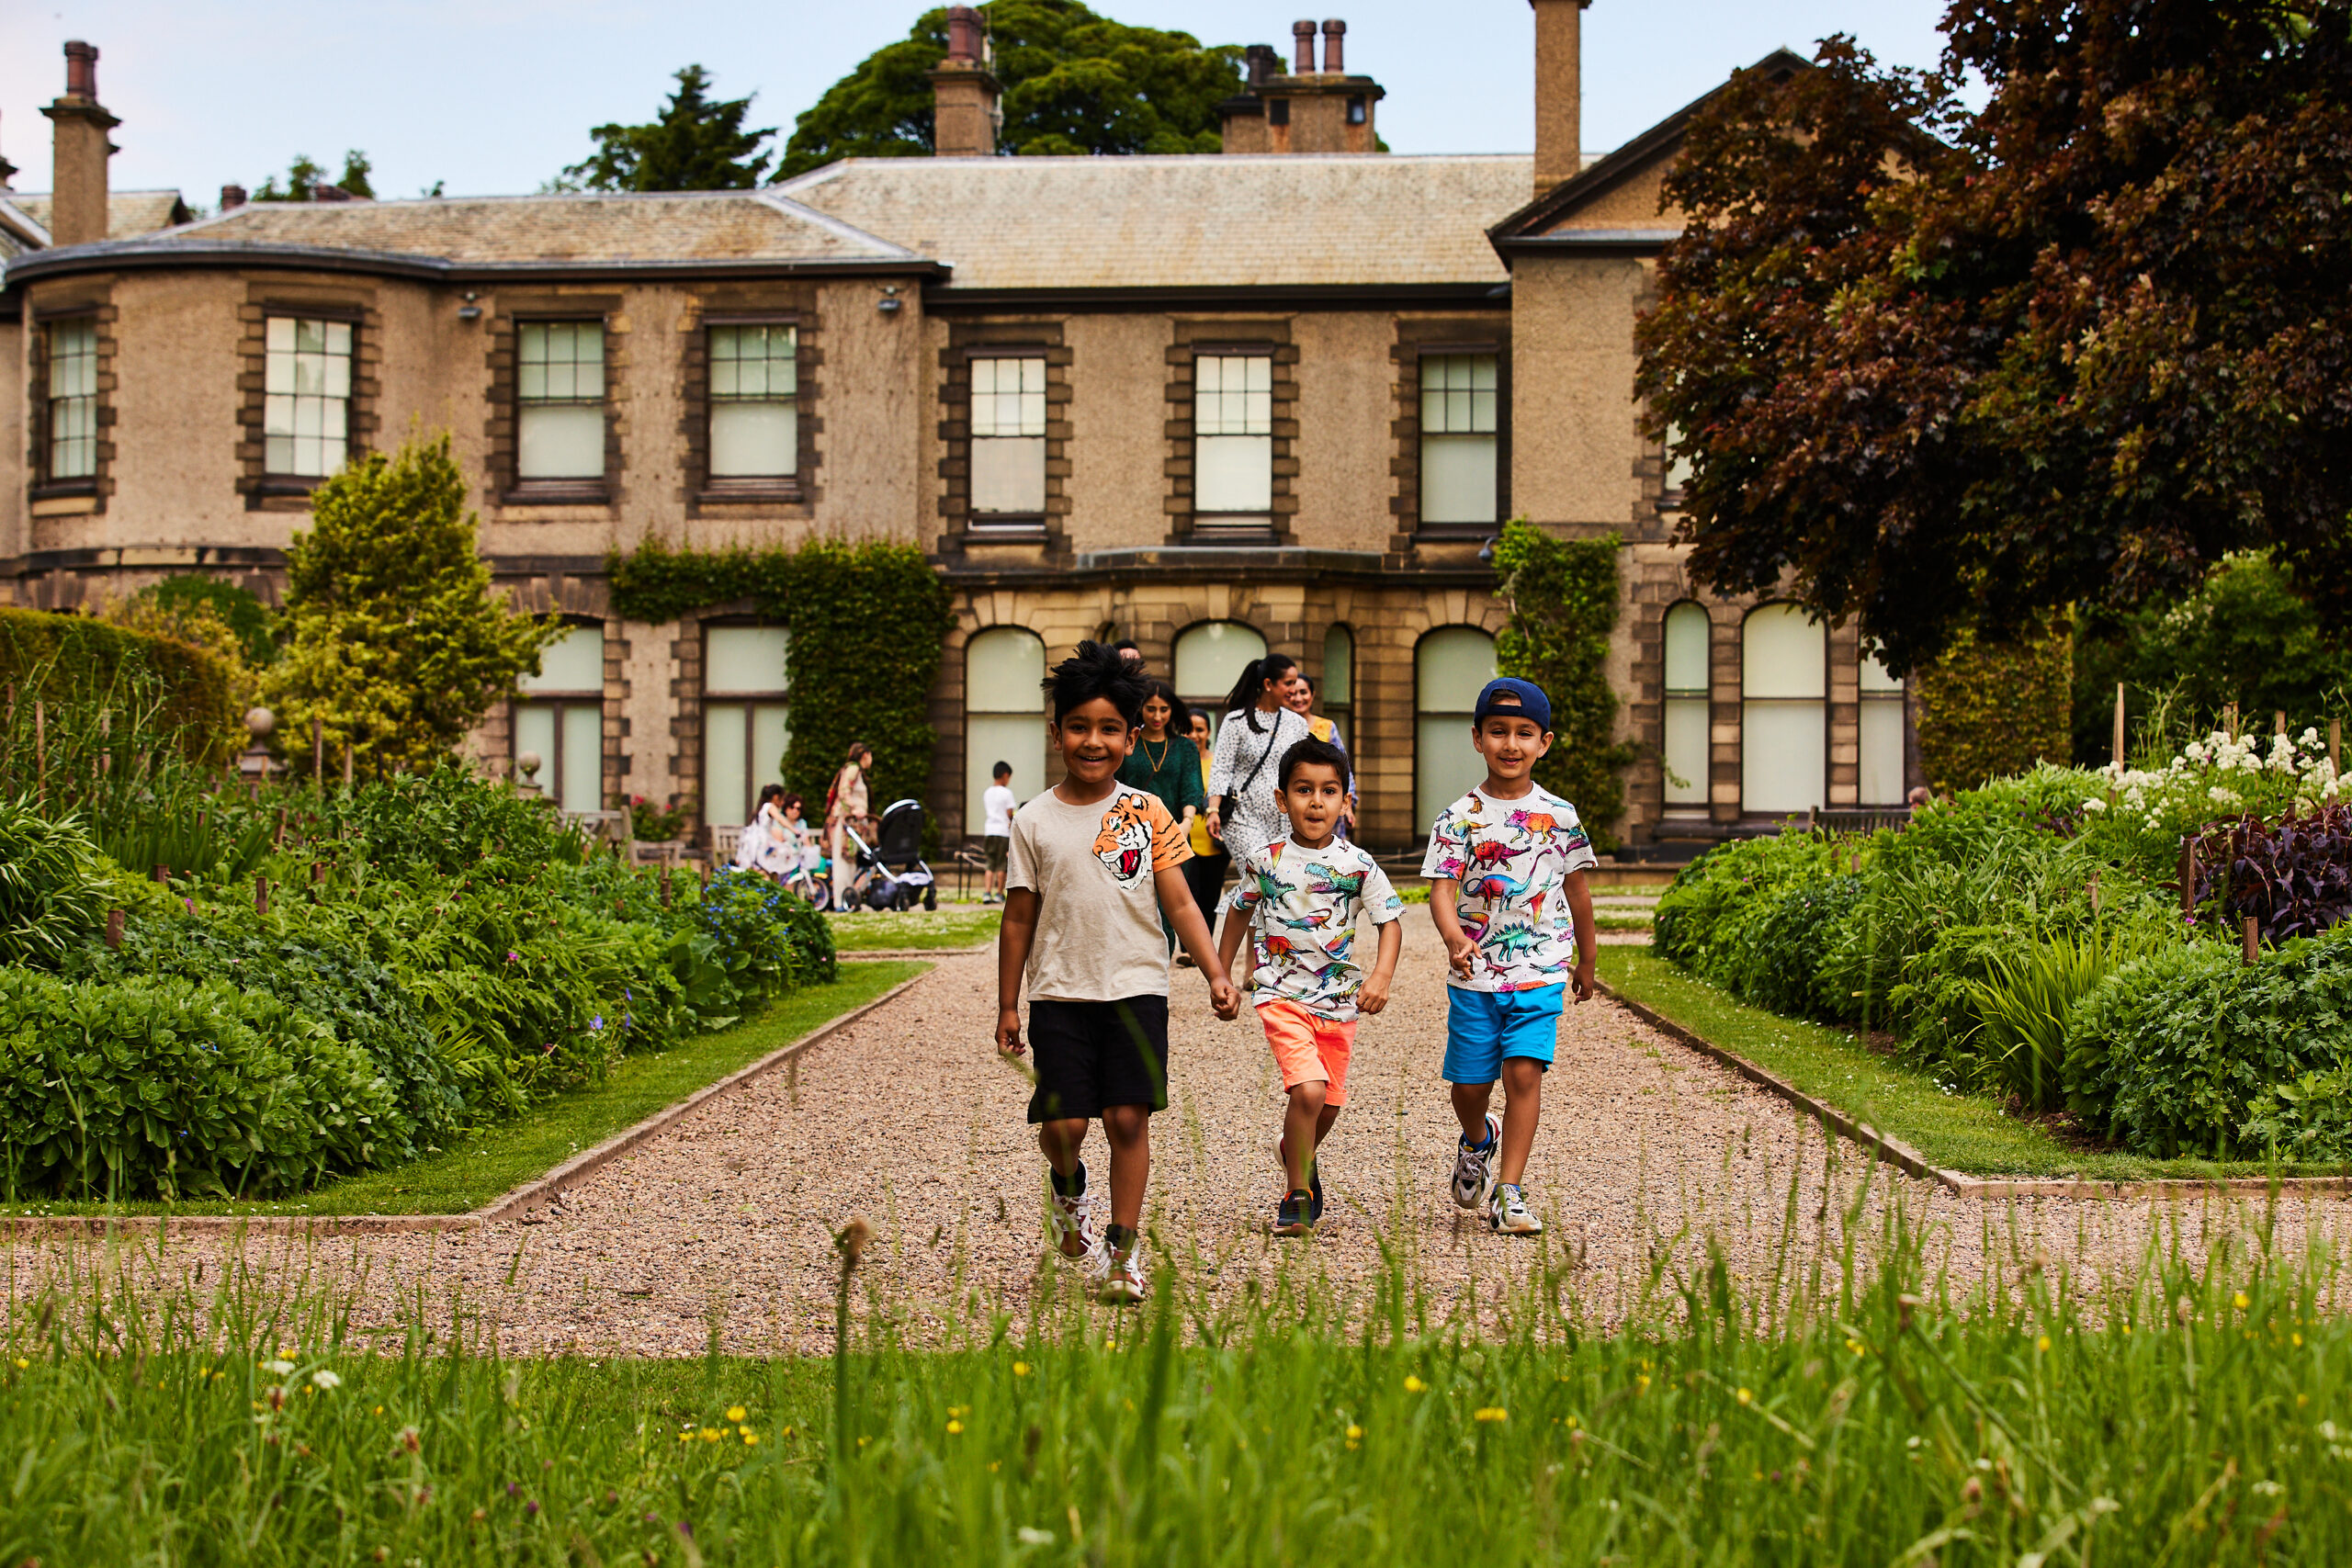 Lotherton Hall exterior, with children playing on front lawn. Sun is shining.